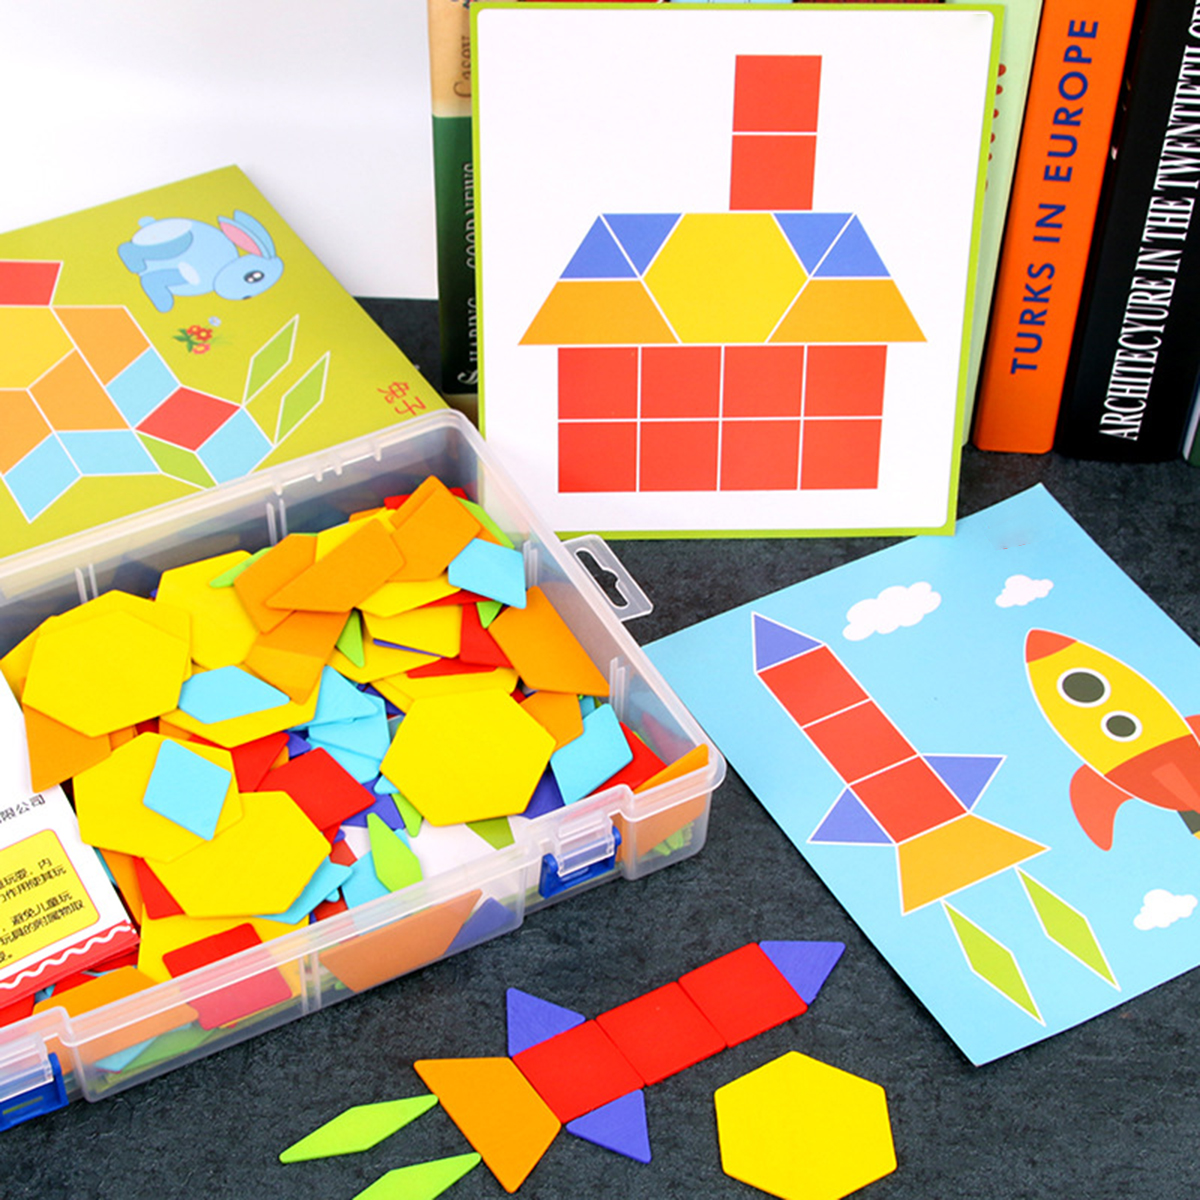 170PCS-Wooden-IQ-Game-Jigsaw-Early-Learning-Educational-Tangram-Puzzle-Kid-Toy-1607821-7